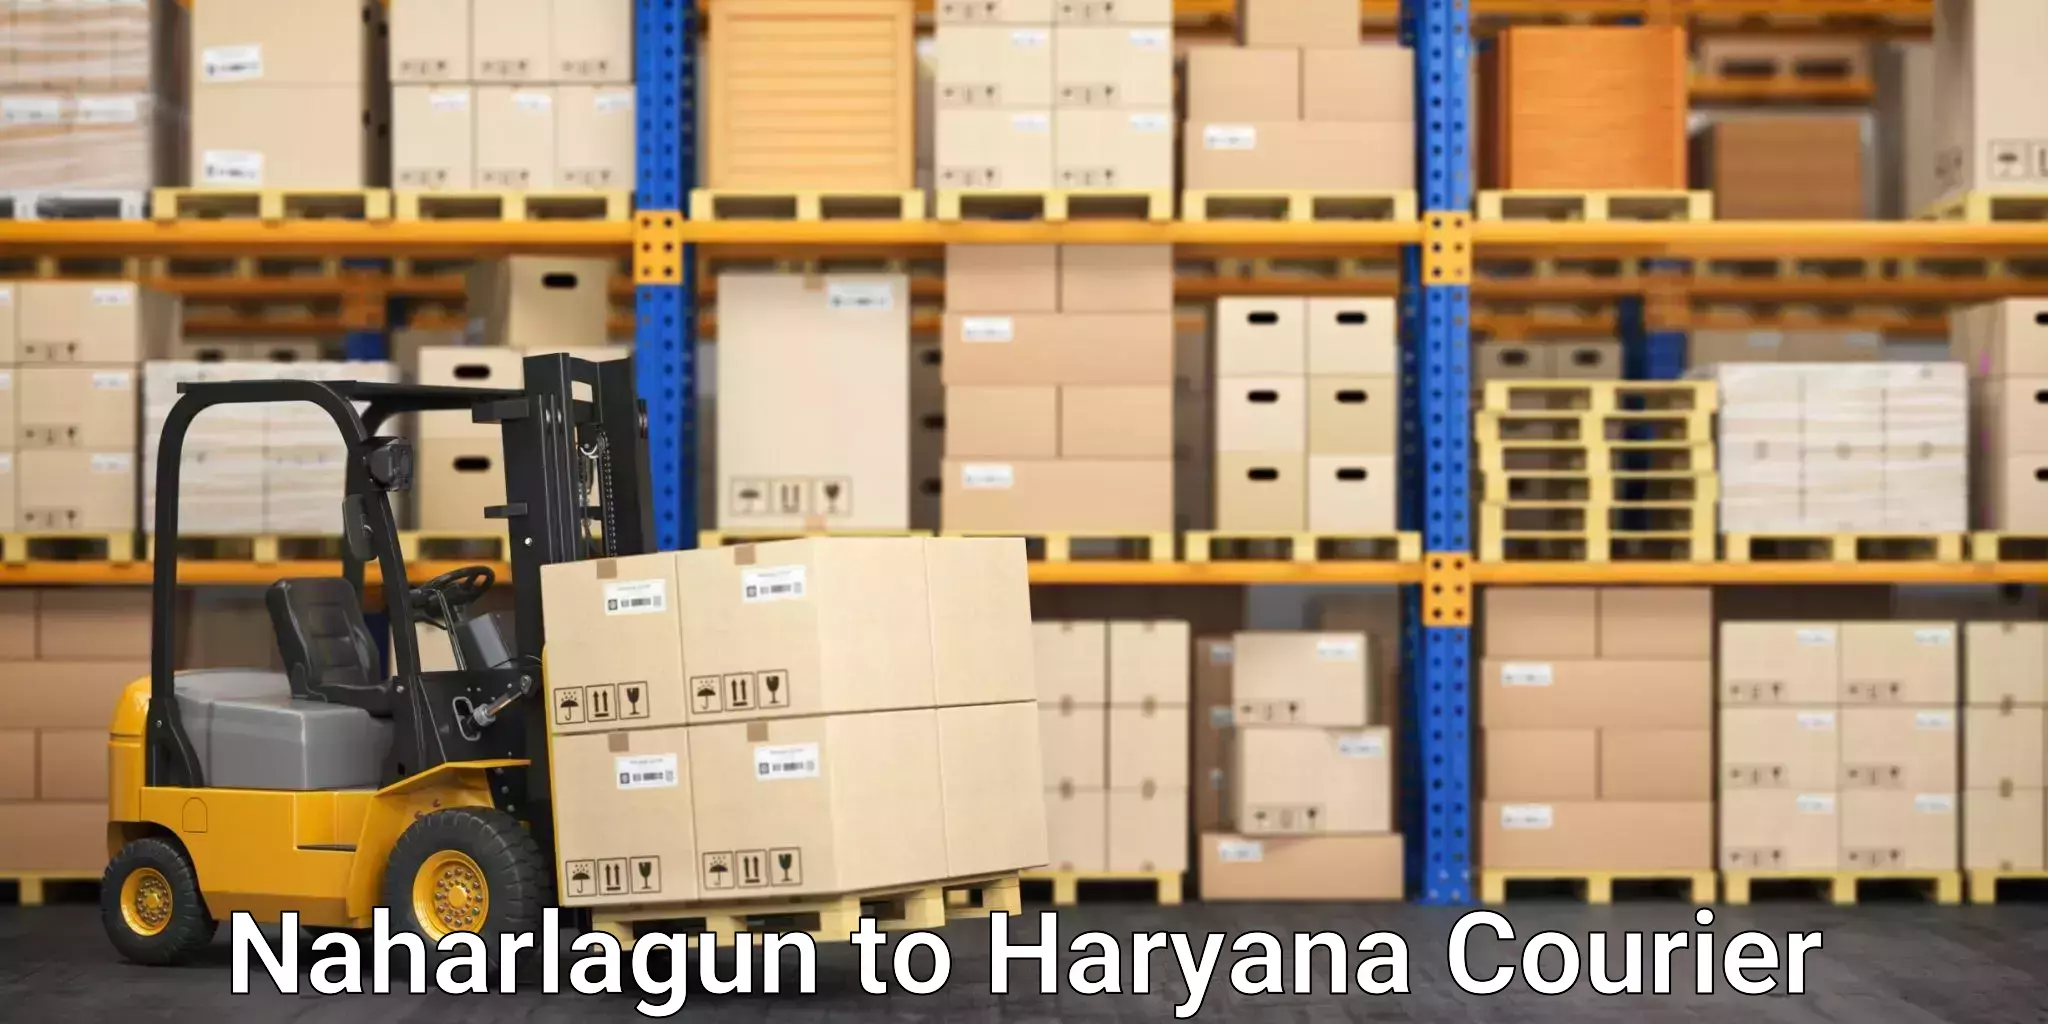 State-of-the-art courier technology Naharlagun to Loharu